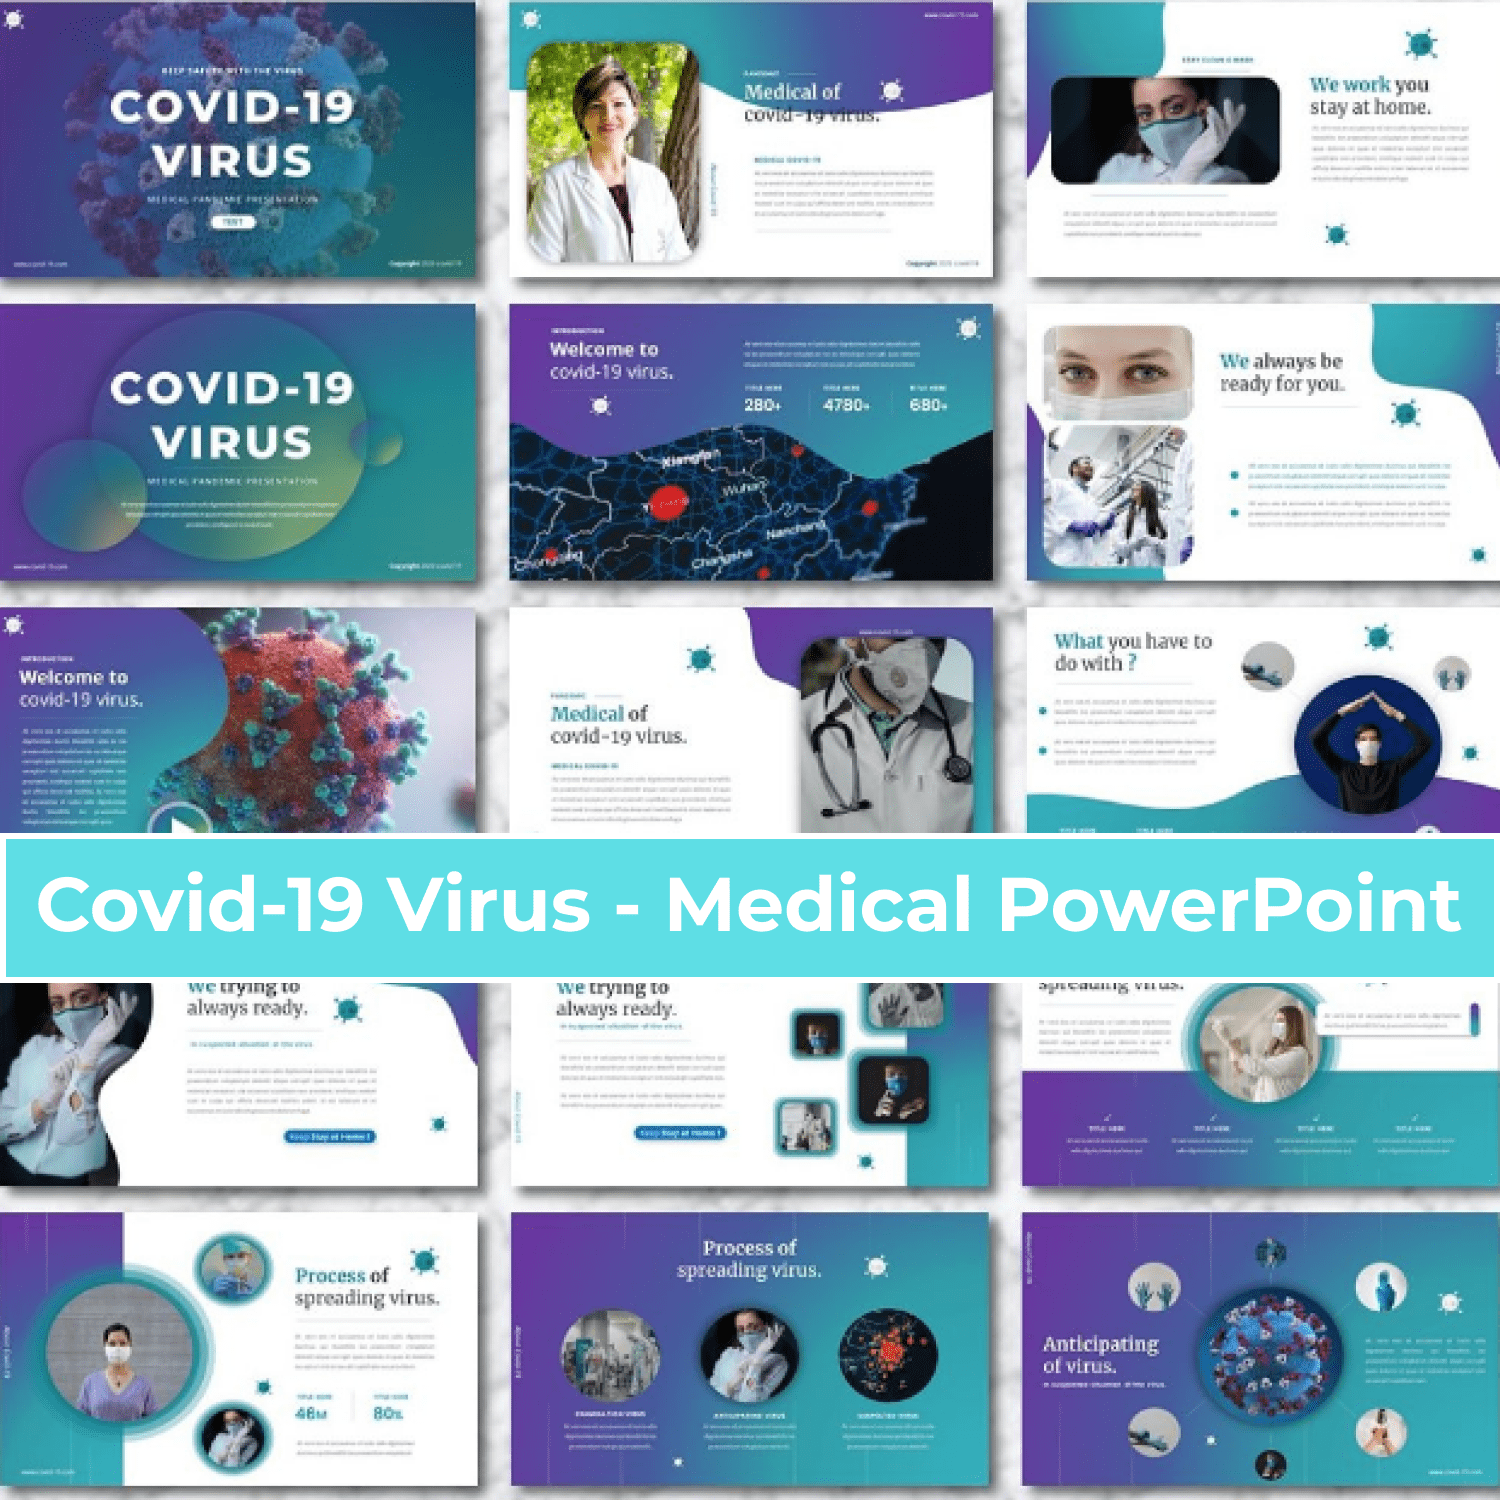 Covid-19 Virus - Medical PowerPoint cover image.